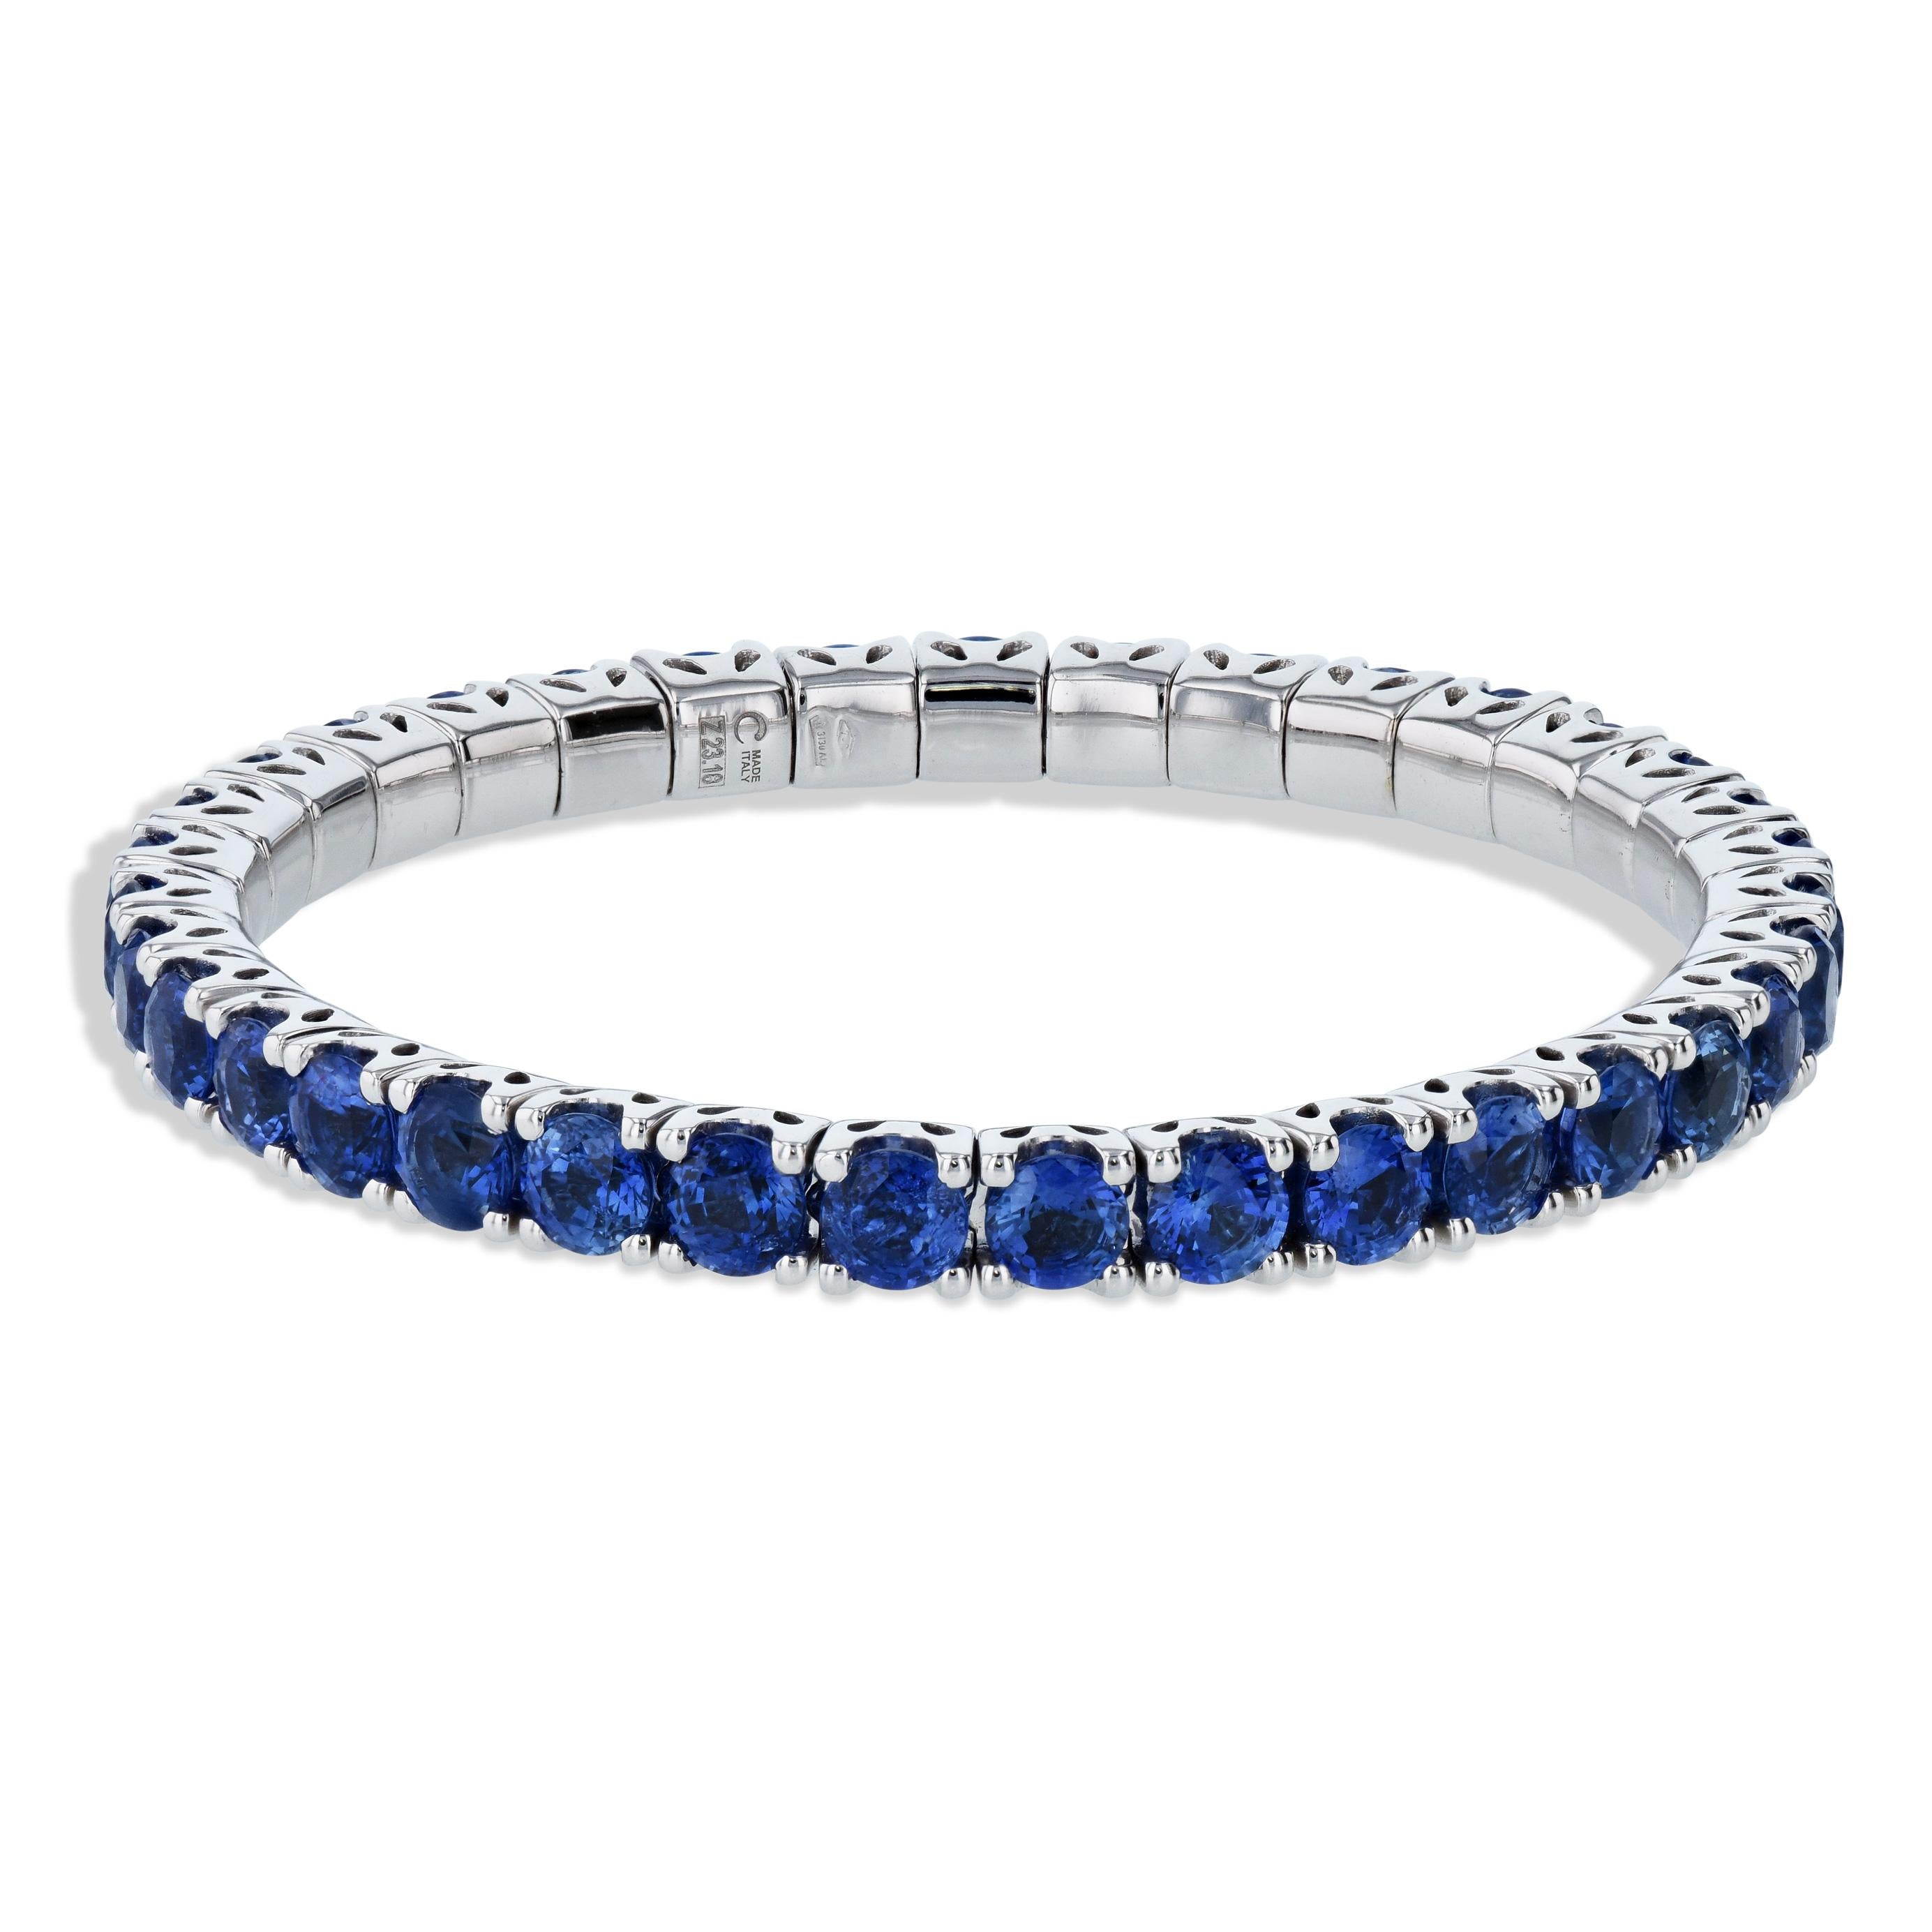 This exquisite 18 karat white gold stretch bracelet dazzles with 23.18 carats of mesmerizing blue sapphires, in a timeless and tasteful style. Enjoy the effortless on and off with its expanding stretching action. Rest assured its outstanding